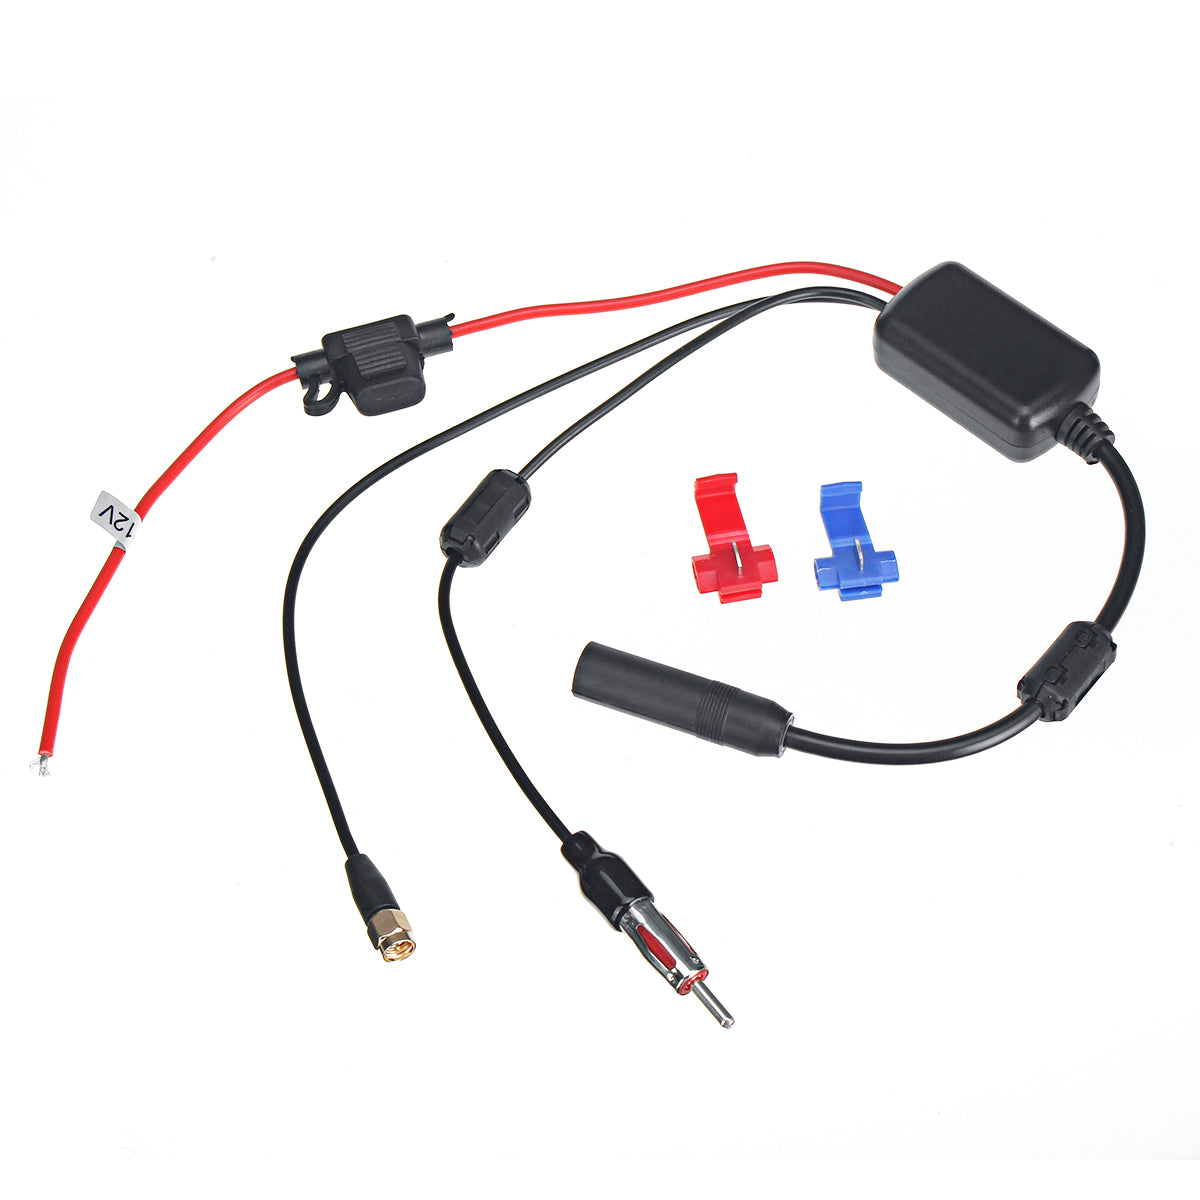 Universal DAB+ FM Car Antenna Aerial Splitter Cable Digital Radio Amplifier with SMA Connector - Auto GoShop